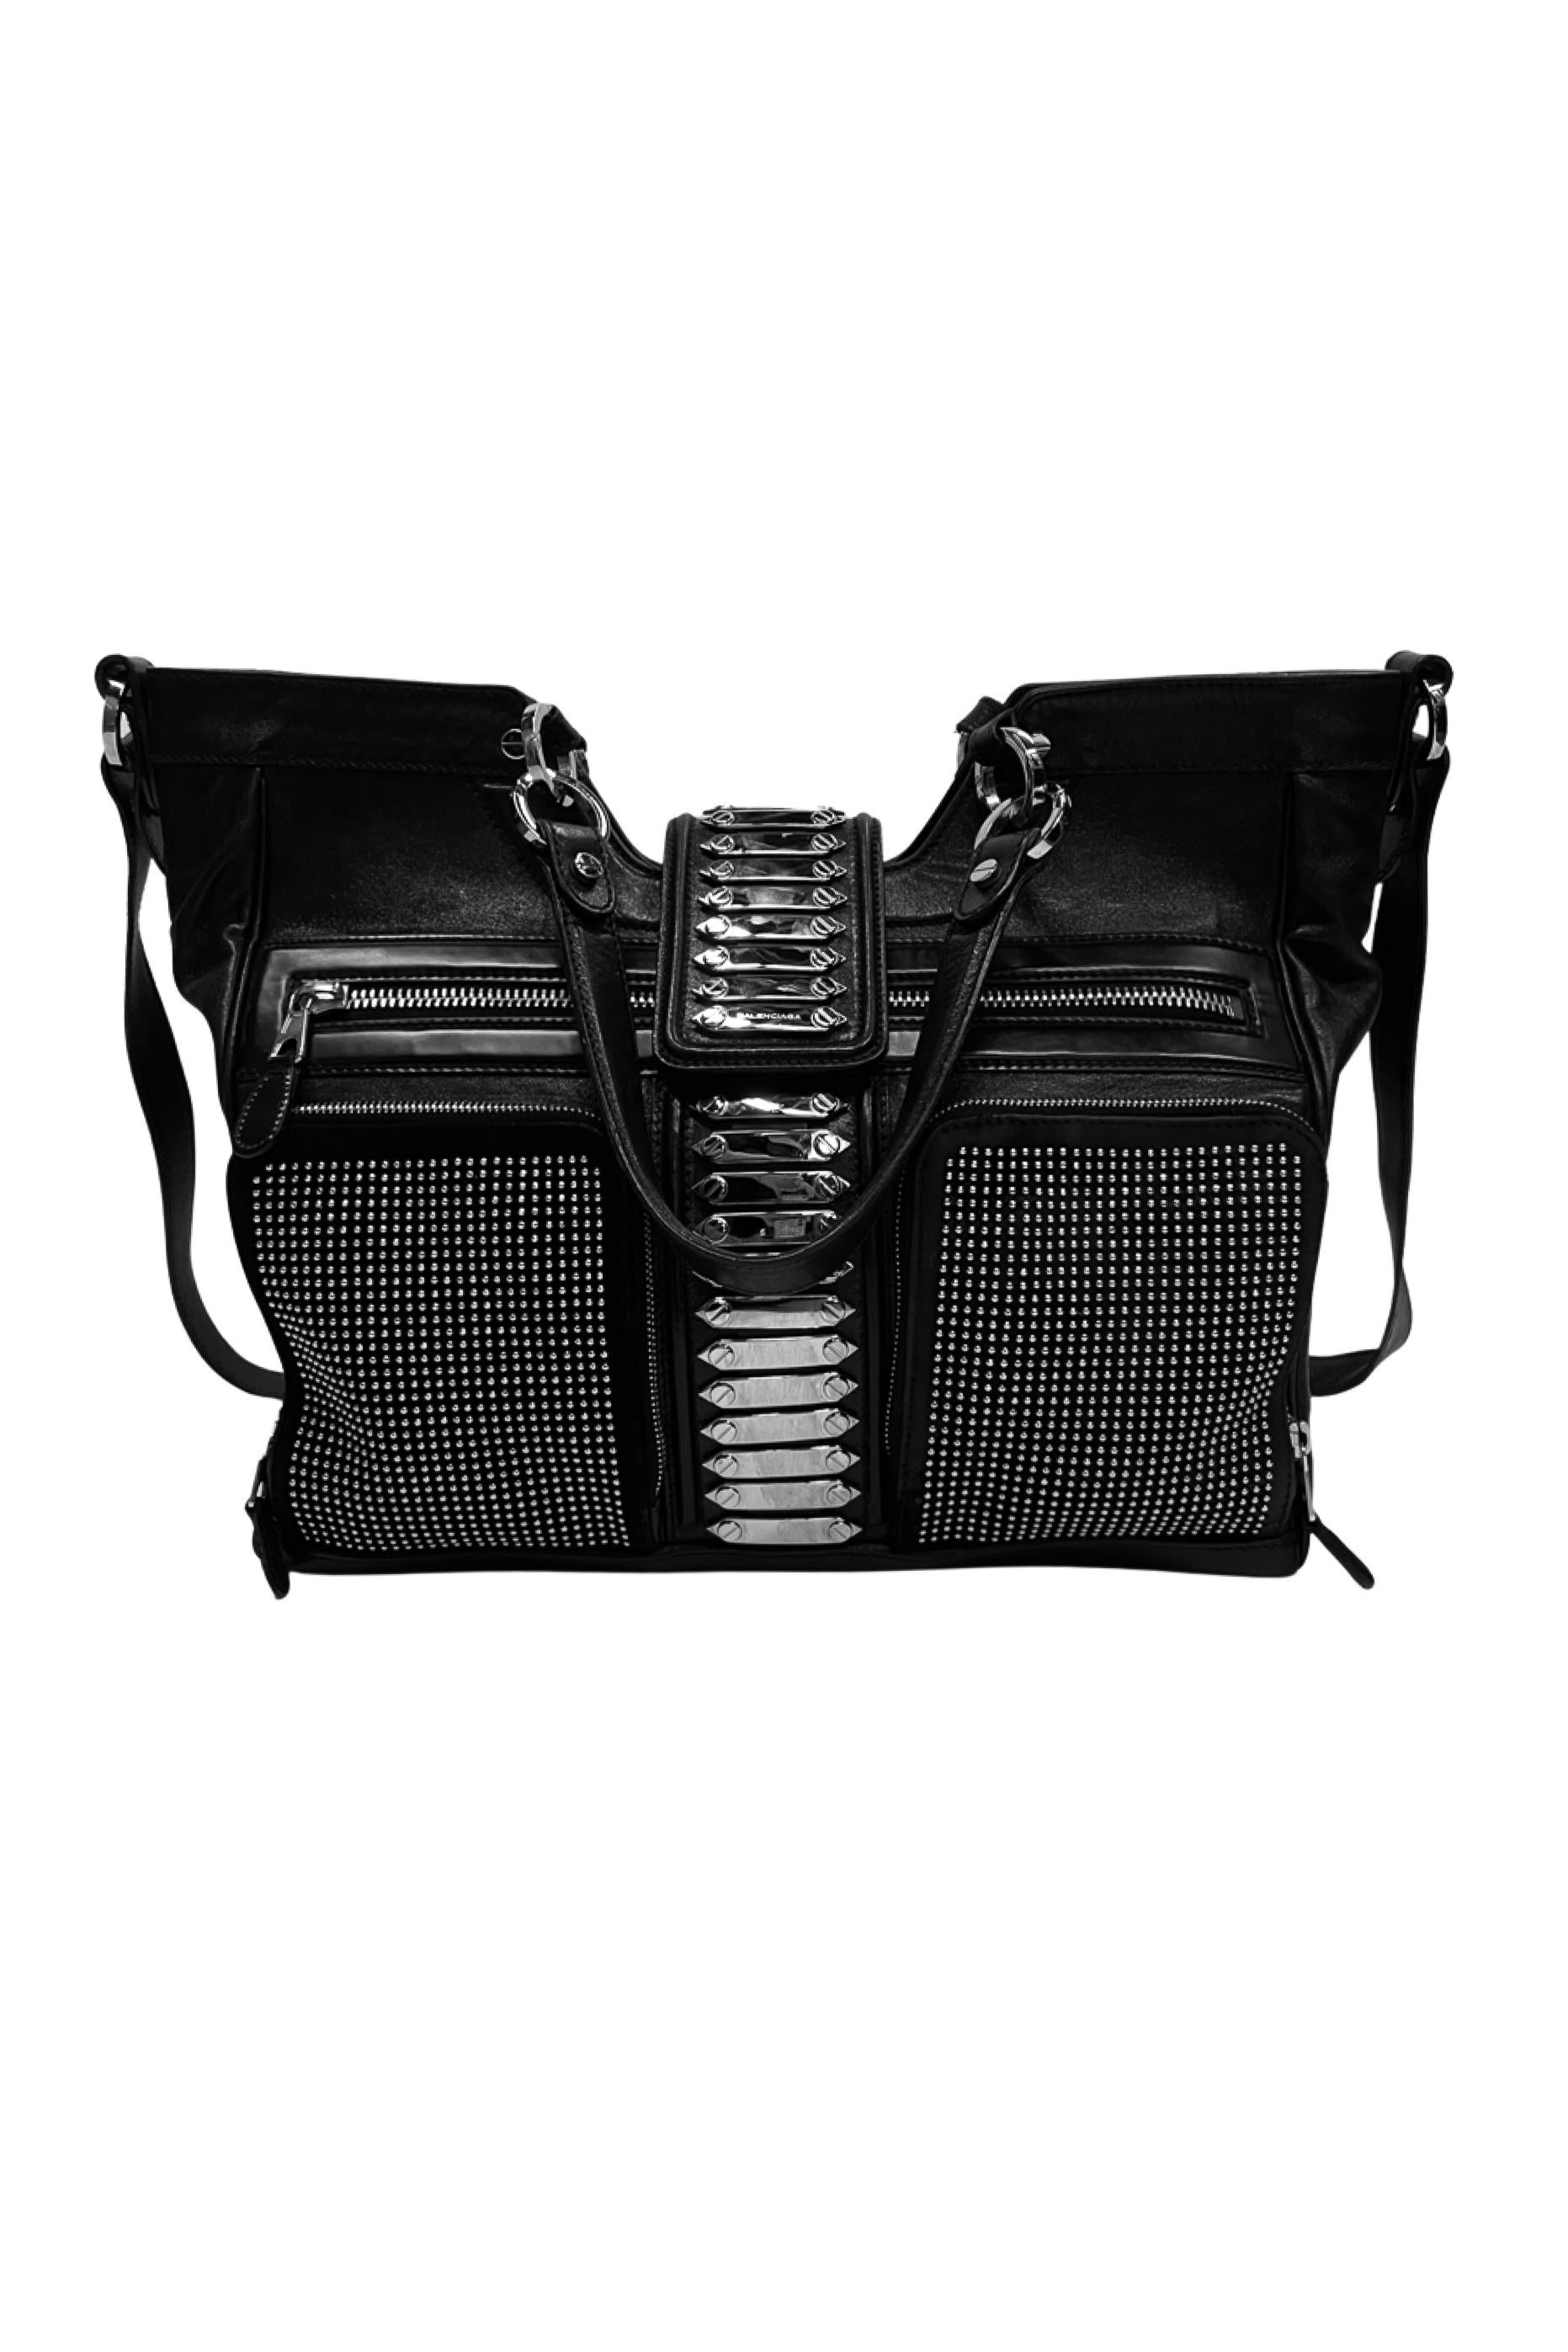 Balenciaga by Nicolas Ghesquiere Black Leather & Studded Chrome Bag 2007 In Excellent Condition For Sale In Los Angeles, CA